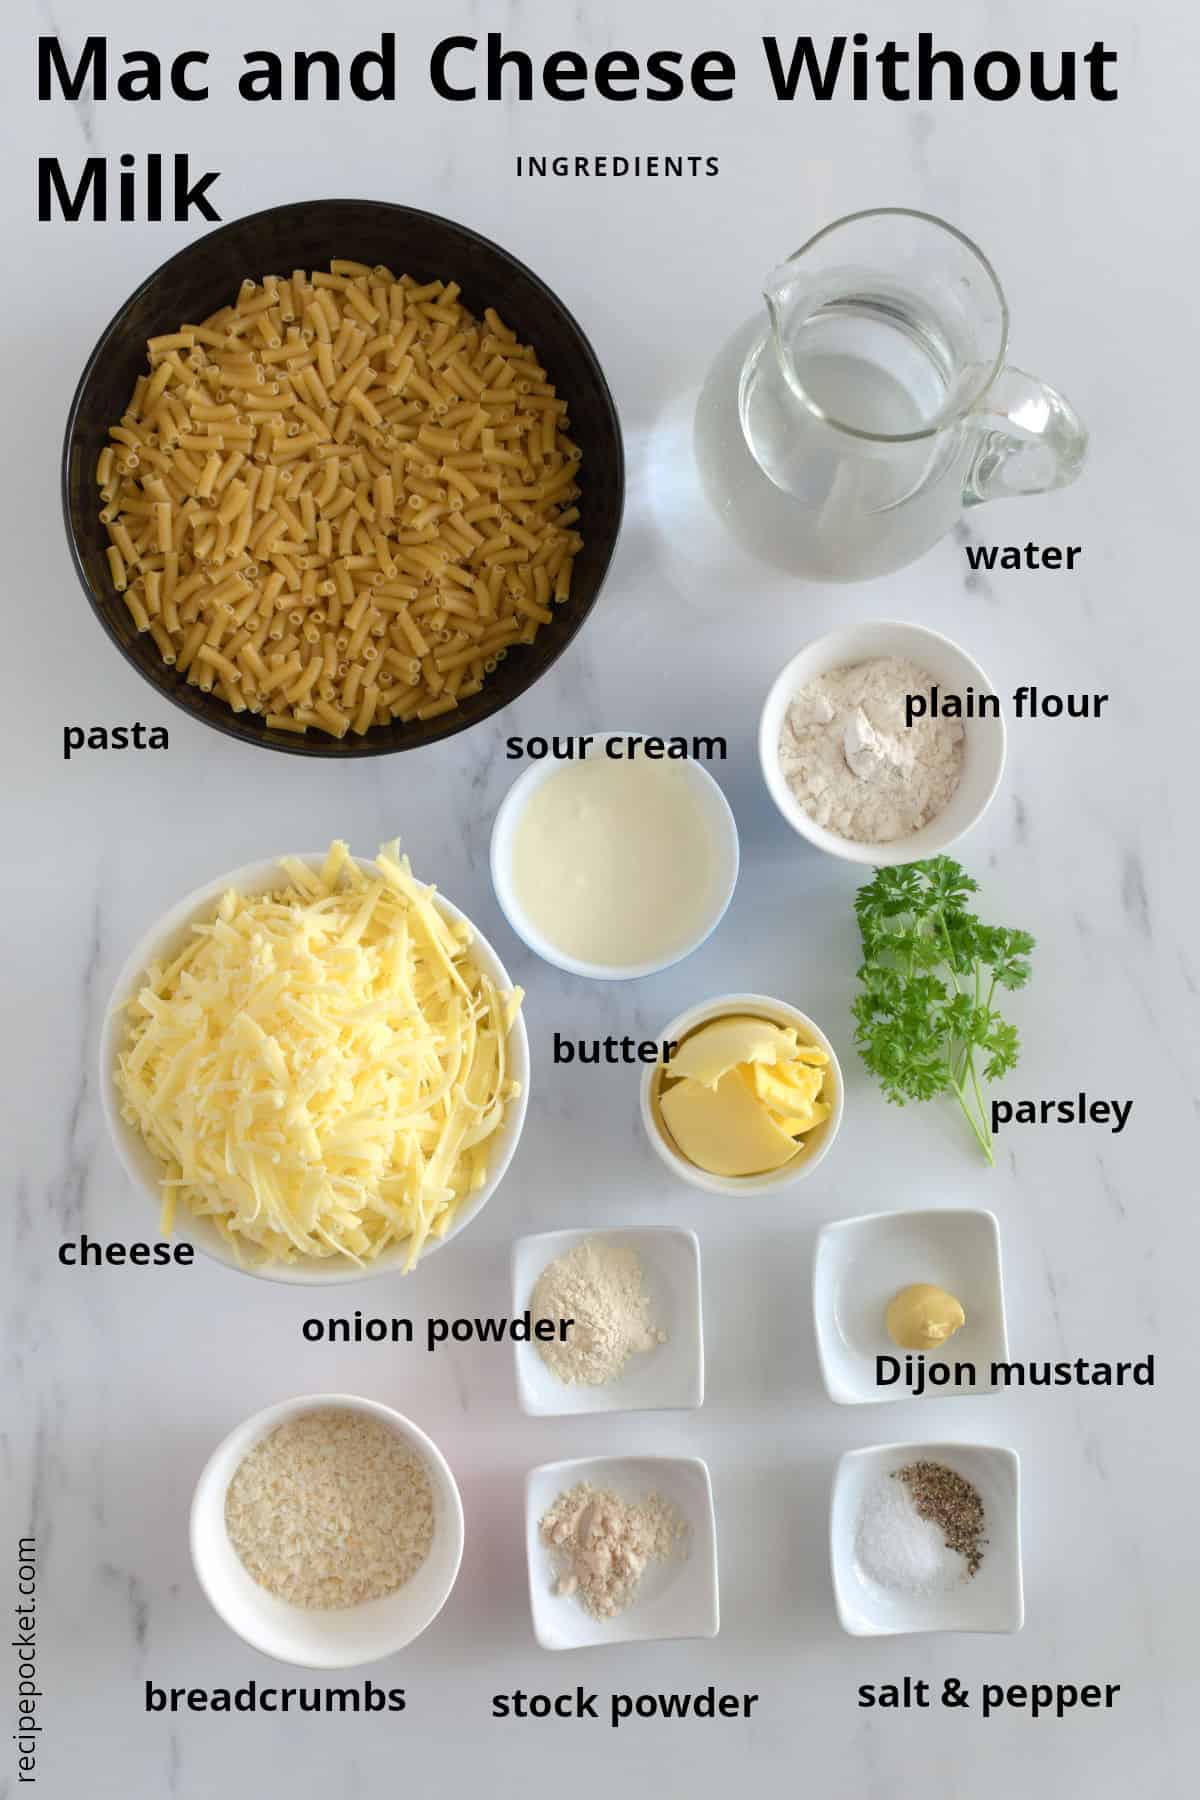 Image of ingredients for homemade mac and cheese without milk.